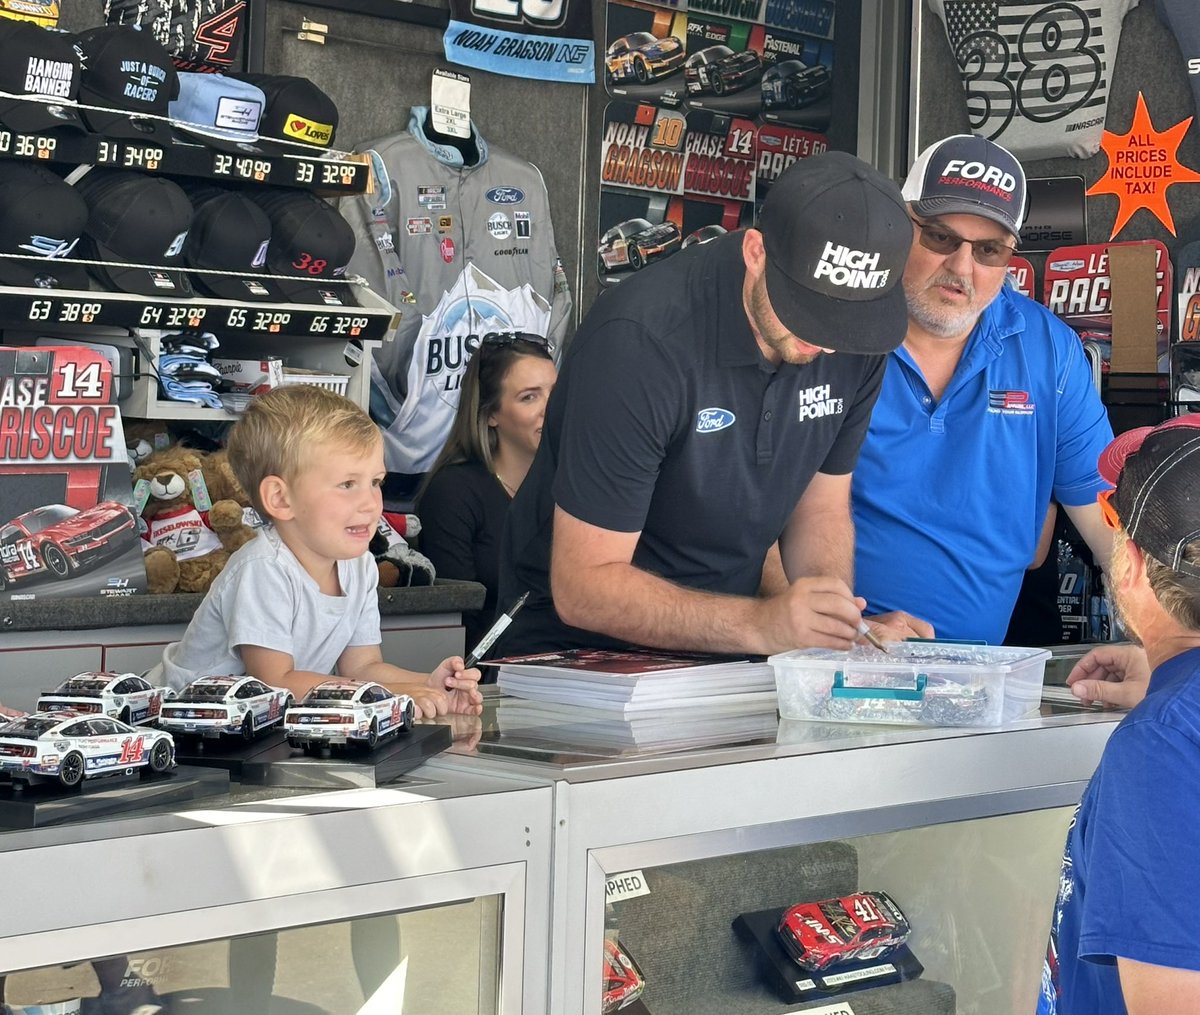 Sorry, @ChaseBriscoe_14. We’re here for Brooks’s autograph.